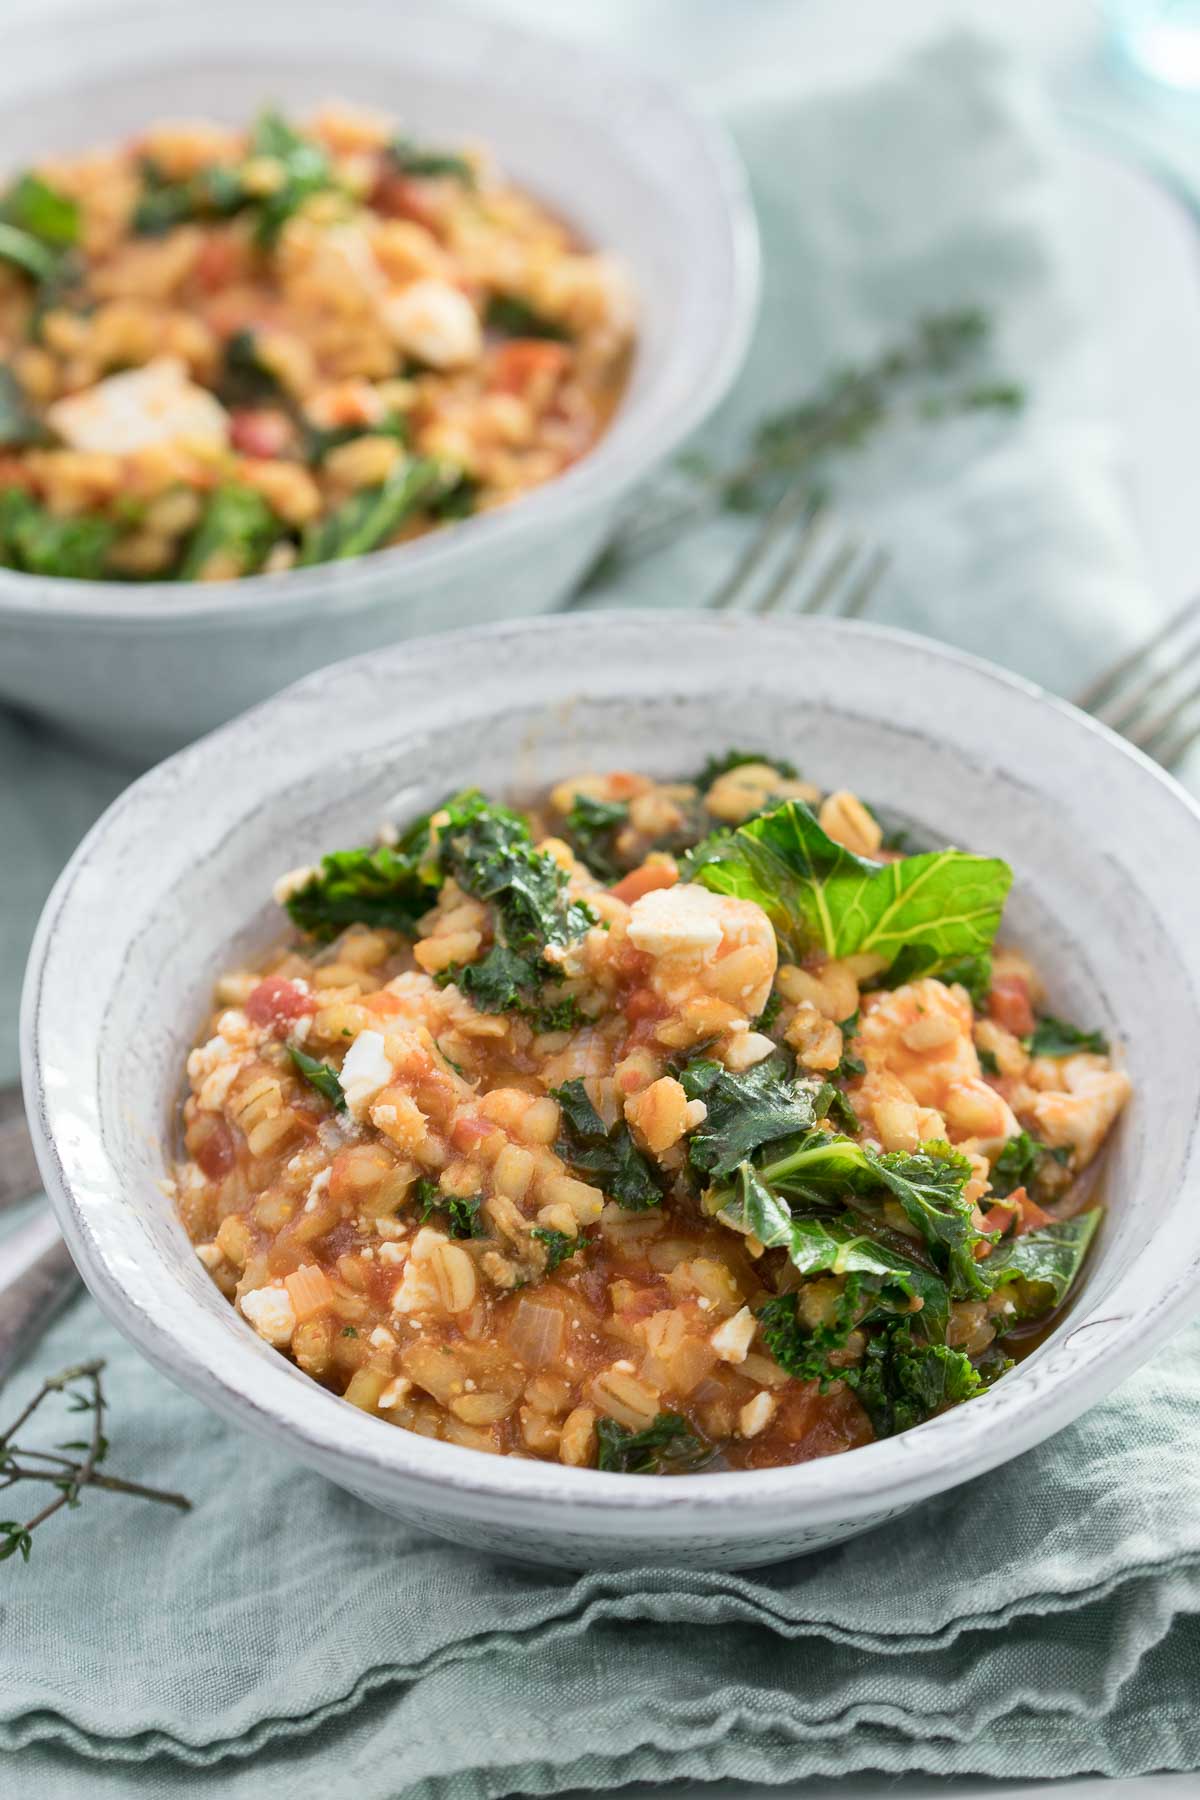 Barley Risotto with Feta and Kale